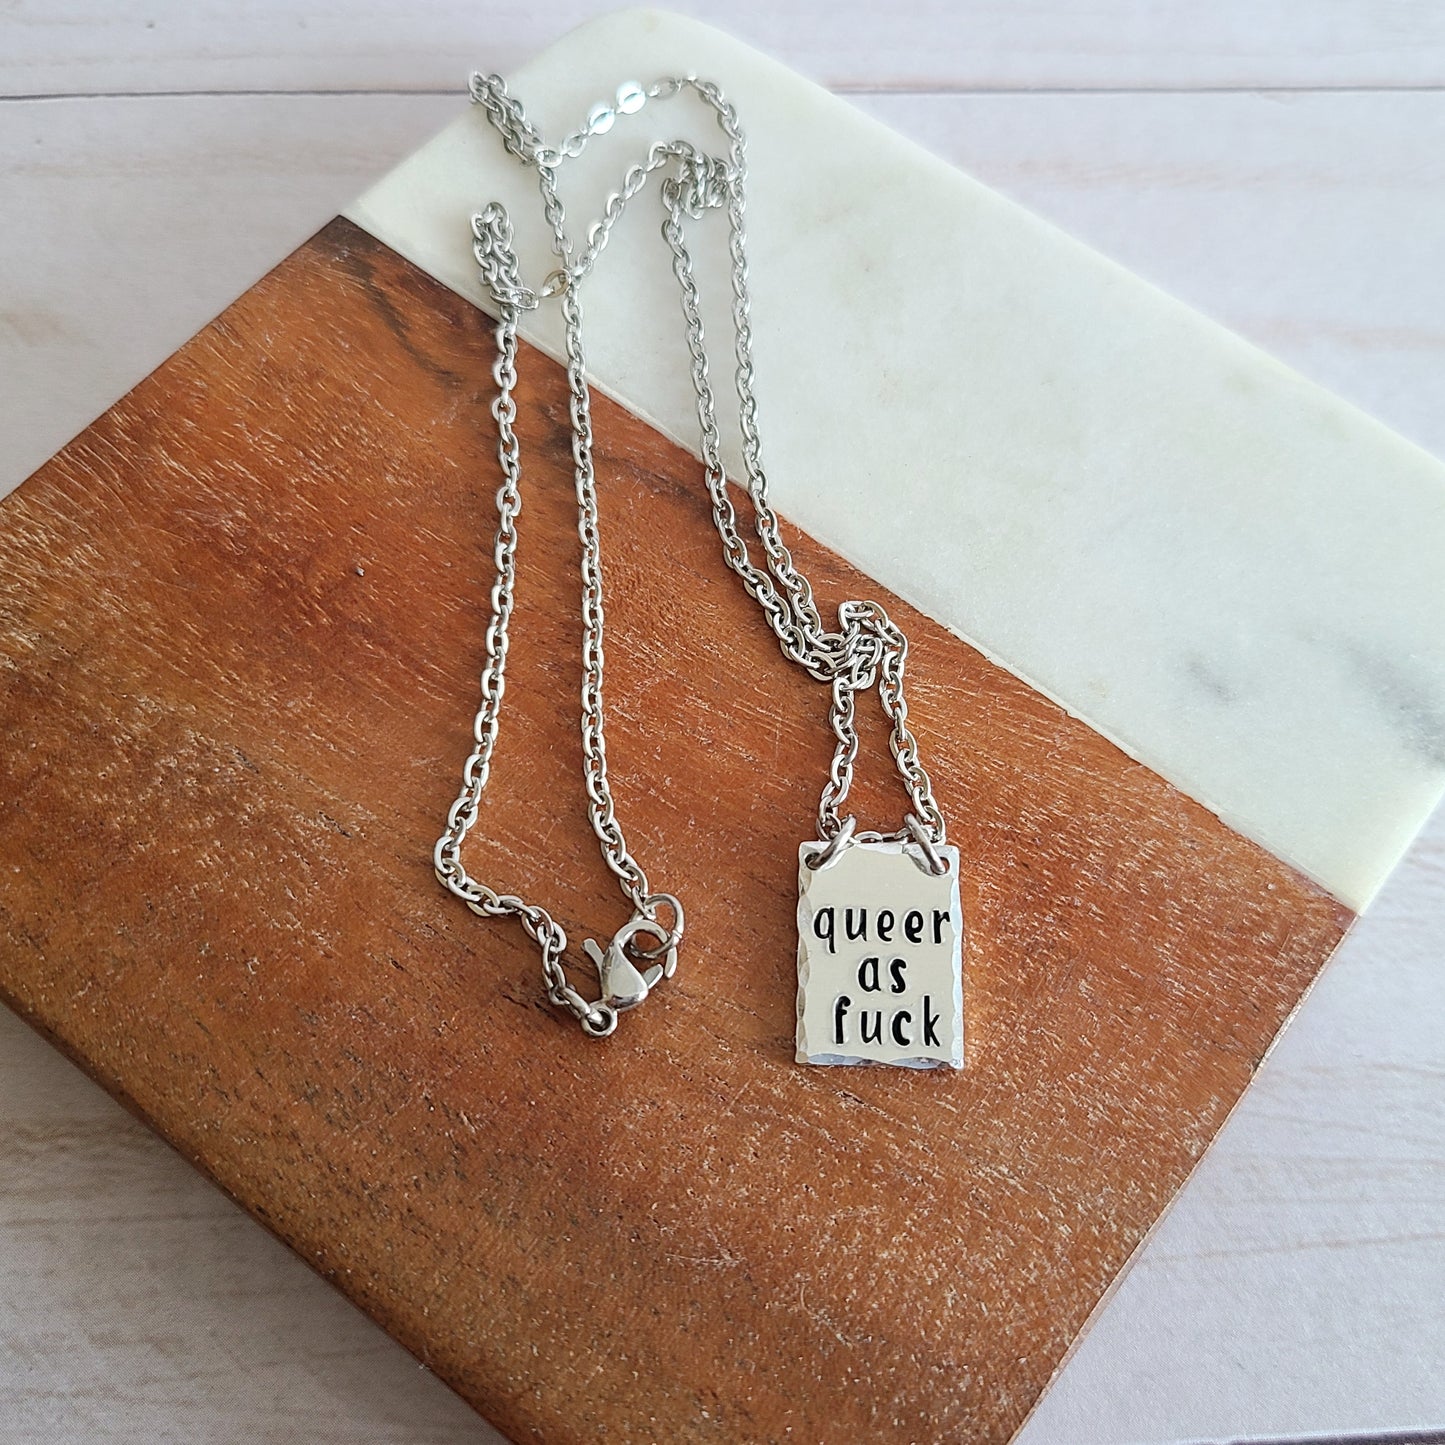 Queer AF Tiny Handstamped Pendant, Silver Queer Jewelry, Super Gay Necklace, Queer Magic Gifts, Pride Month Accessories